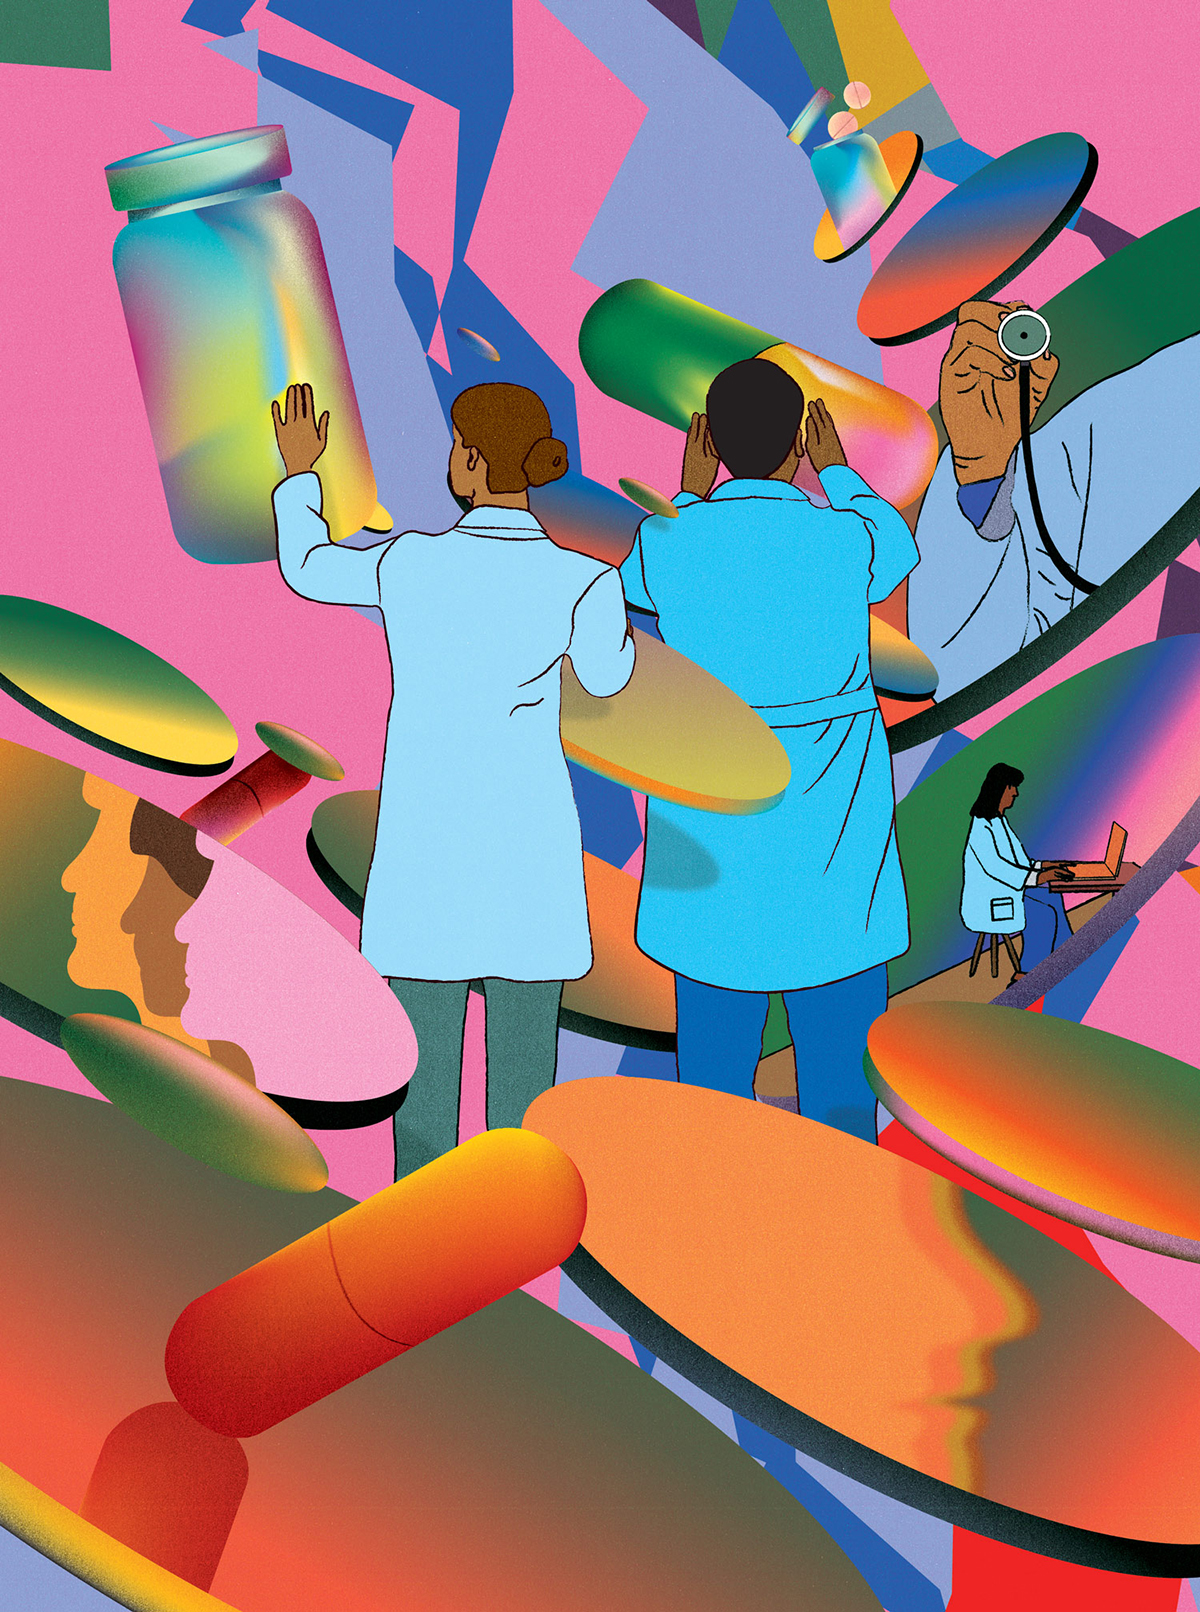 Digitally illustrated collage of health care professionals in white lab coats surrounded by oversized pills, glass bottles and round discs with reflections of people's heads in silhouette profile